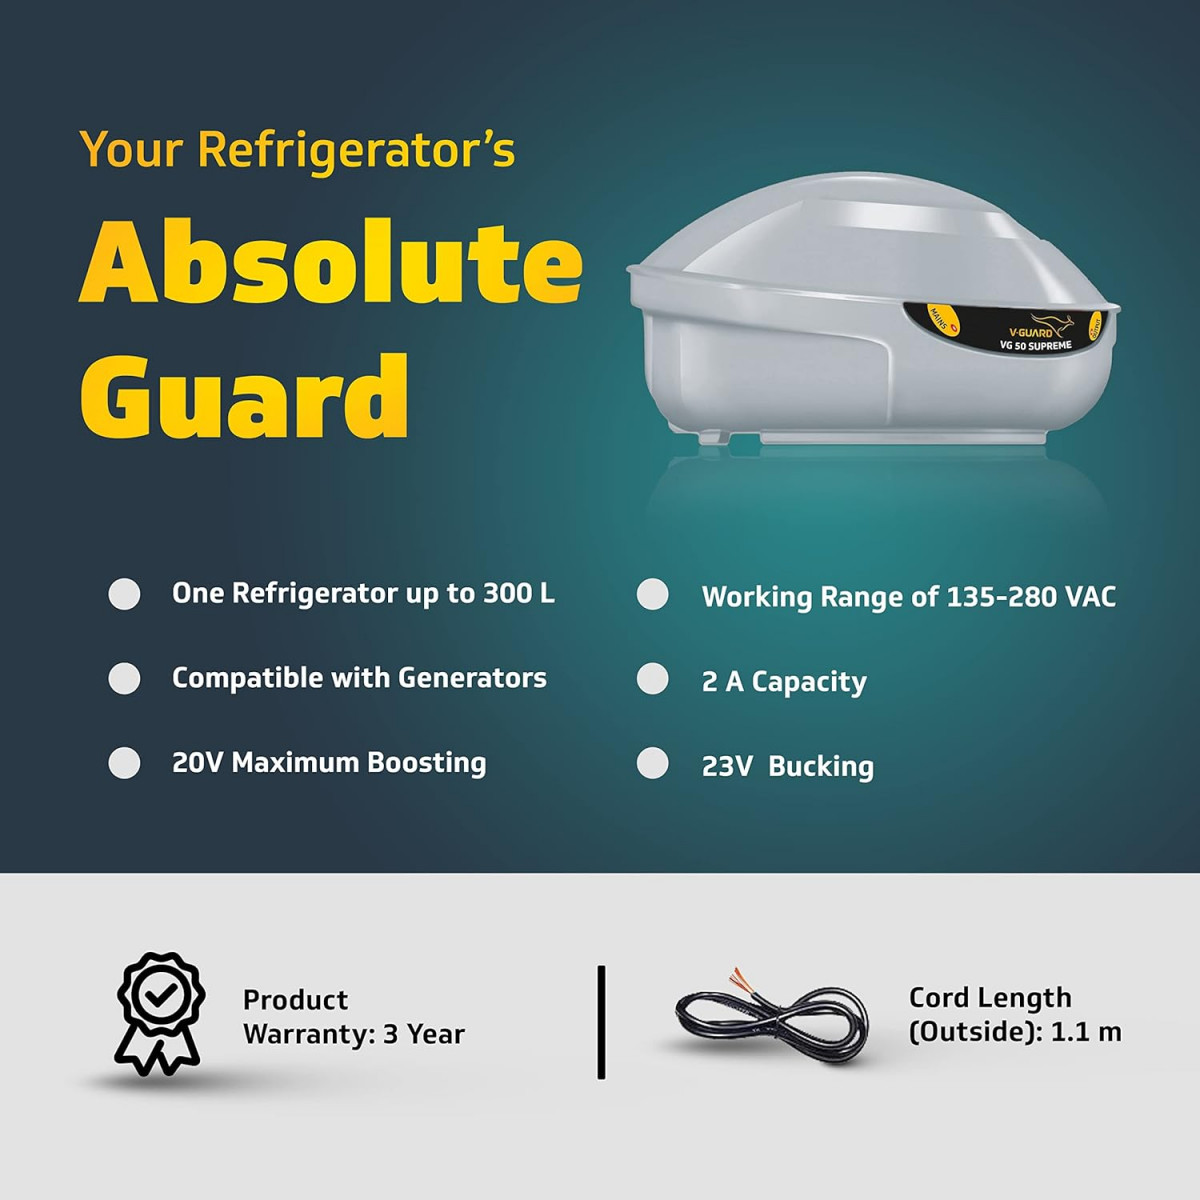 V-Guard VG 50 Supreme Stabilizer for Refrigerator up to 300 L  Advance Overheat Protection  2 A Capacity